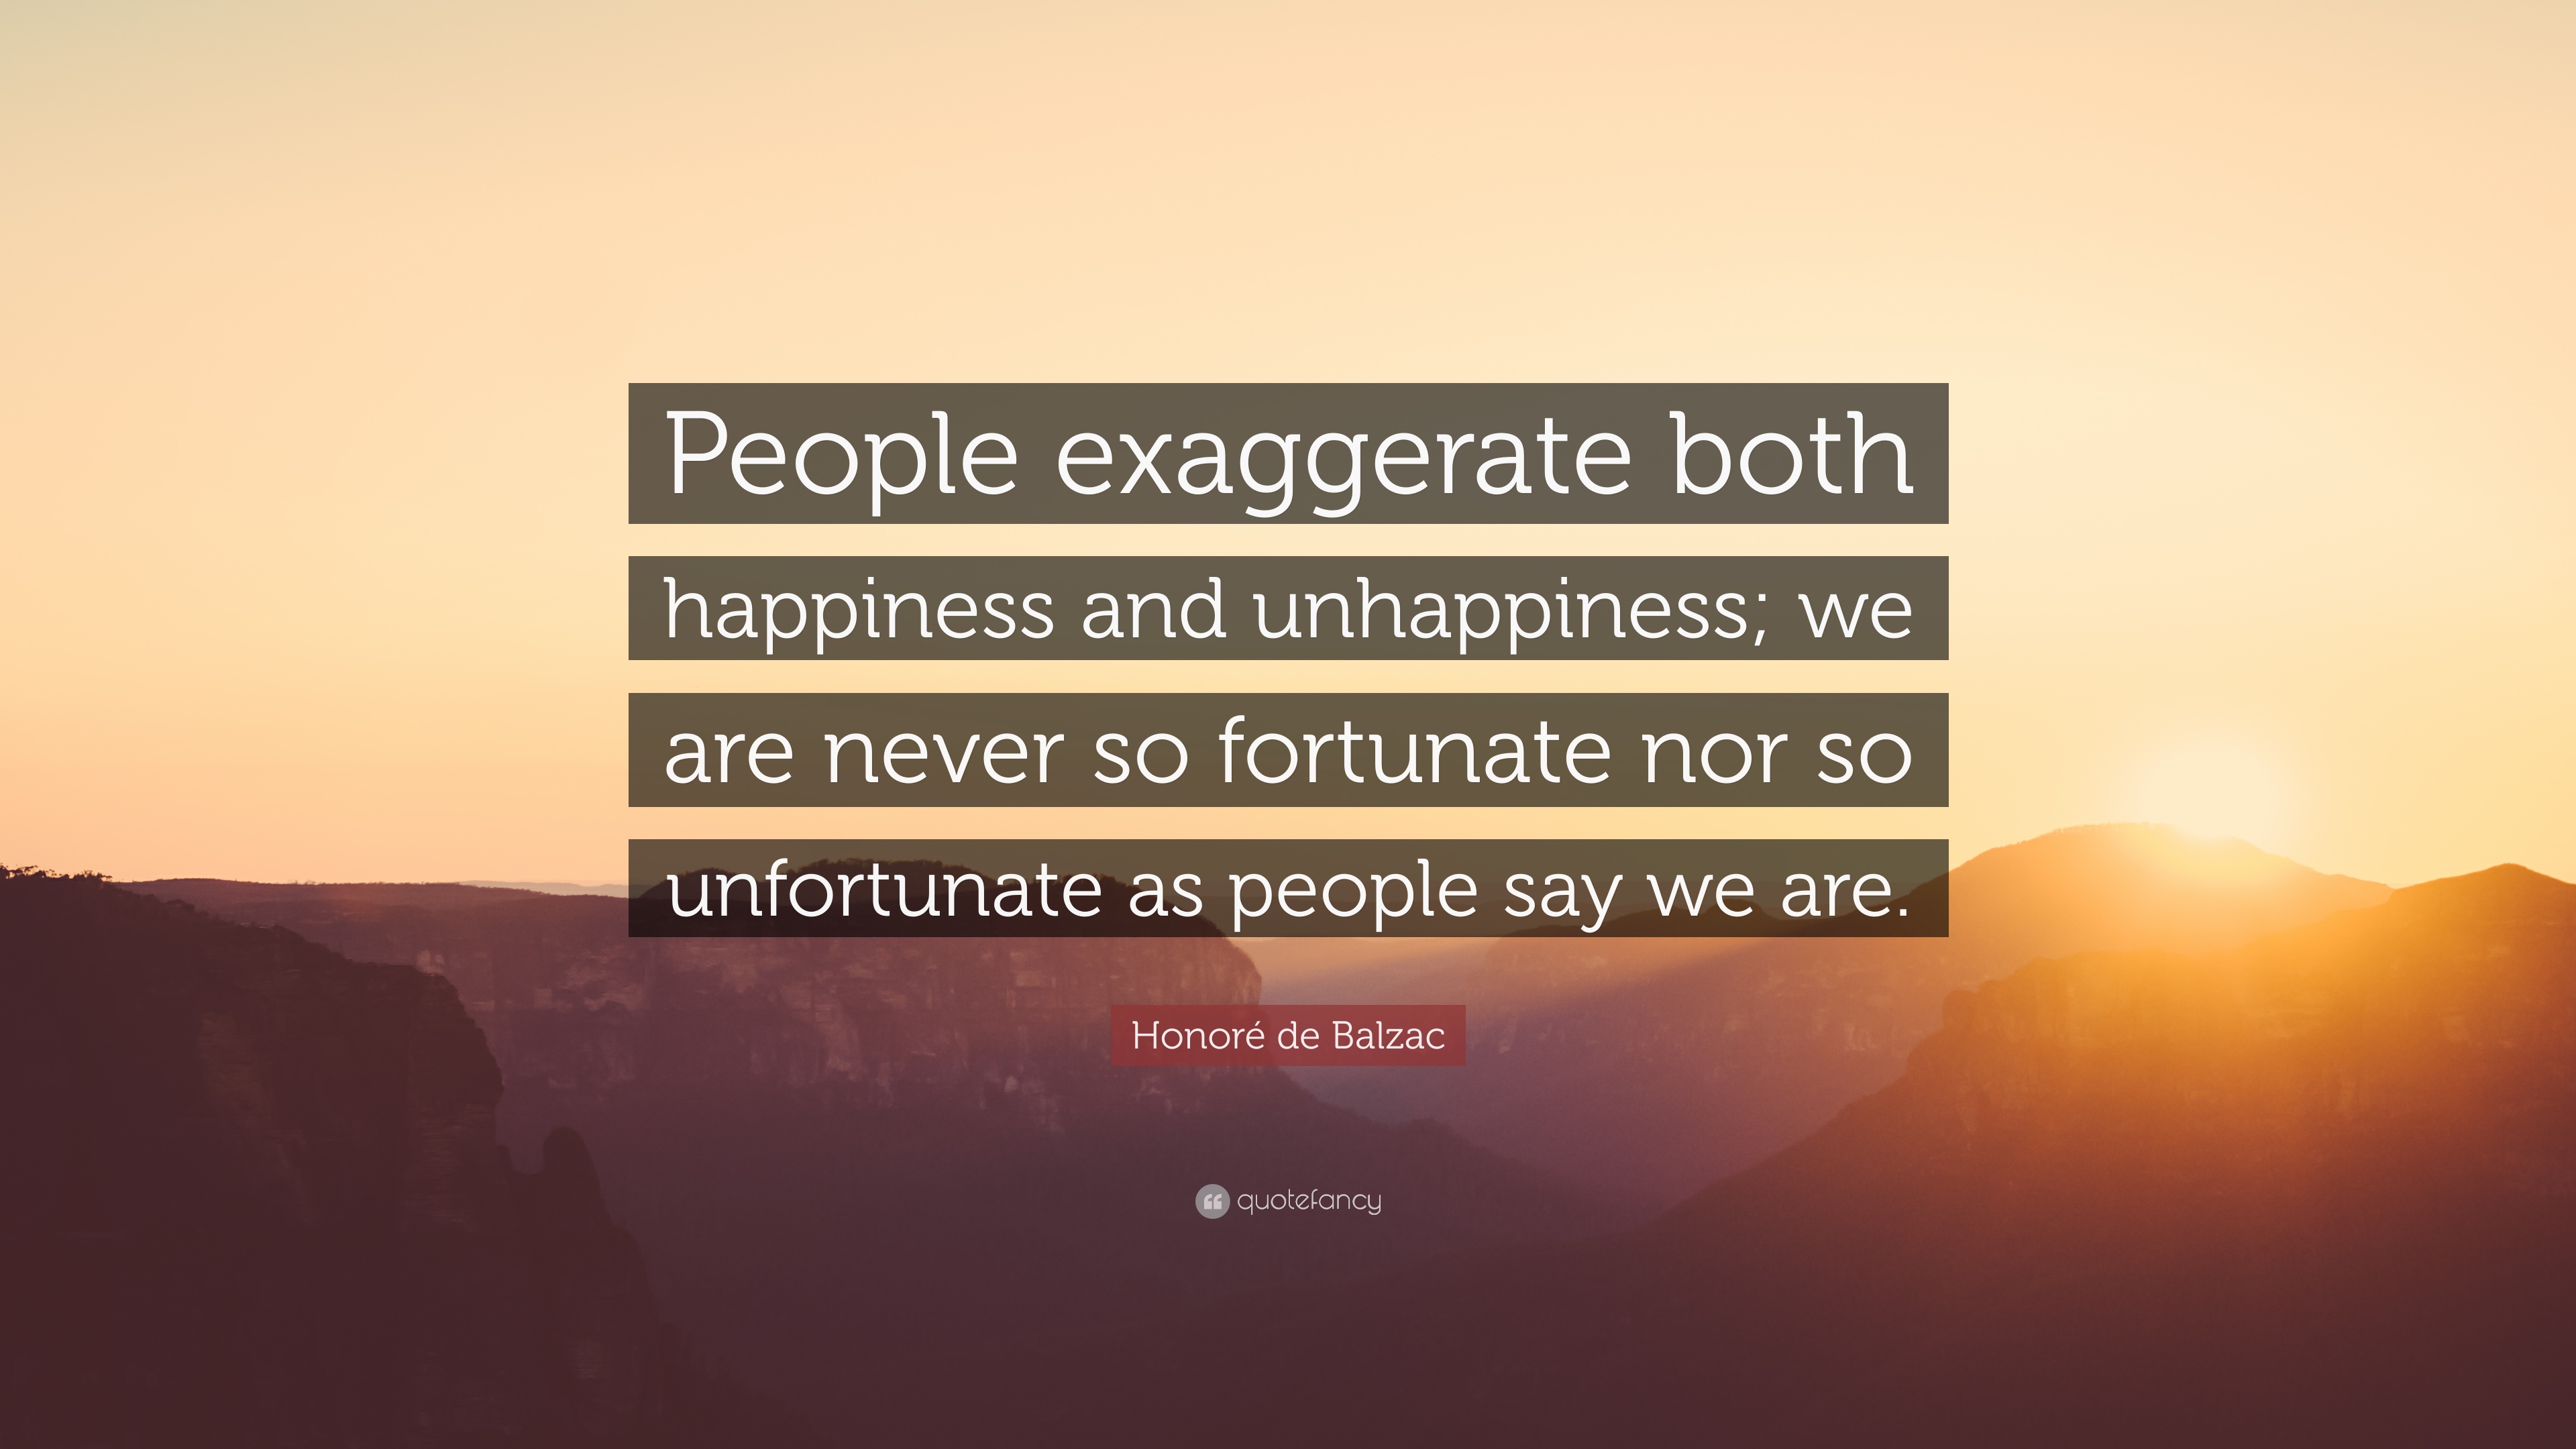 Honoré de Balzac Quote: “People exaggerate both happiness and ...